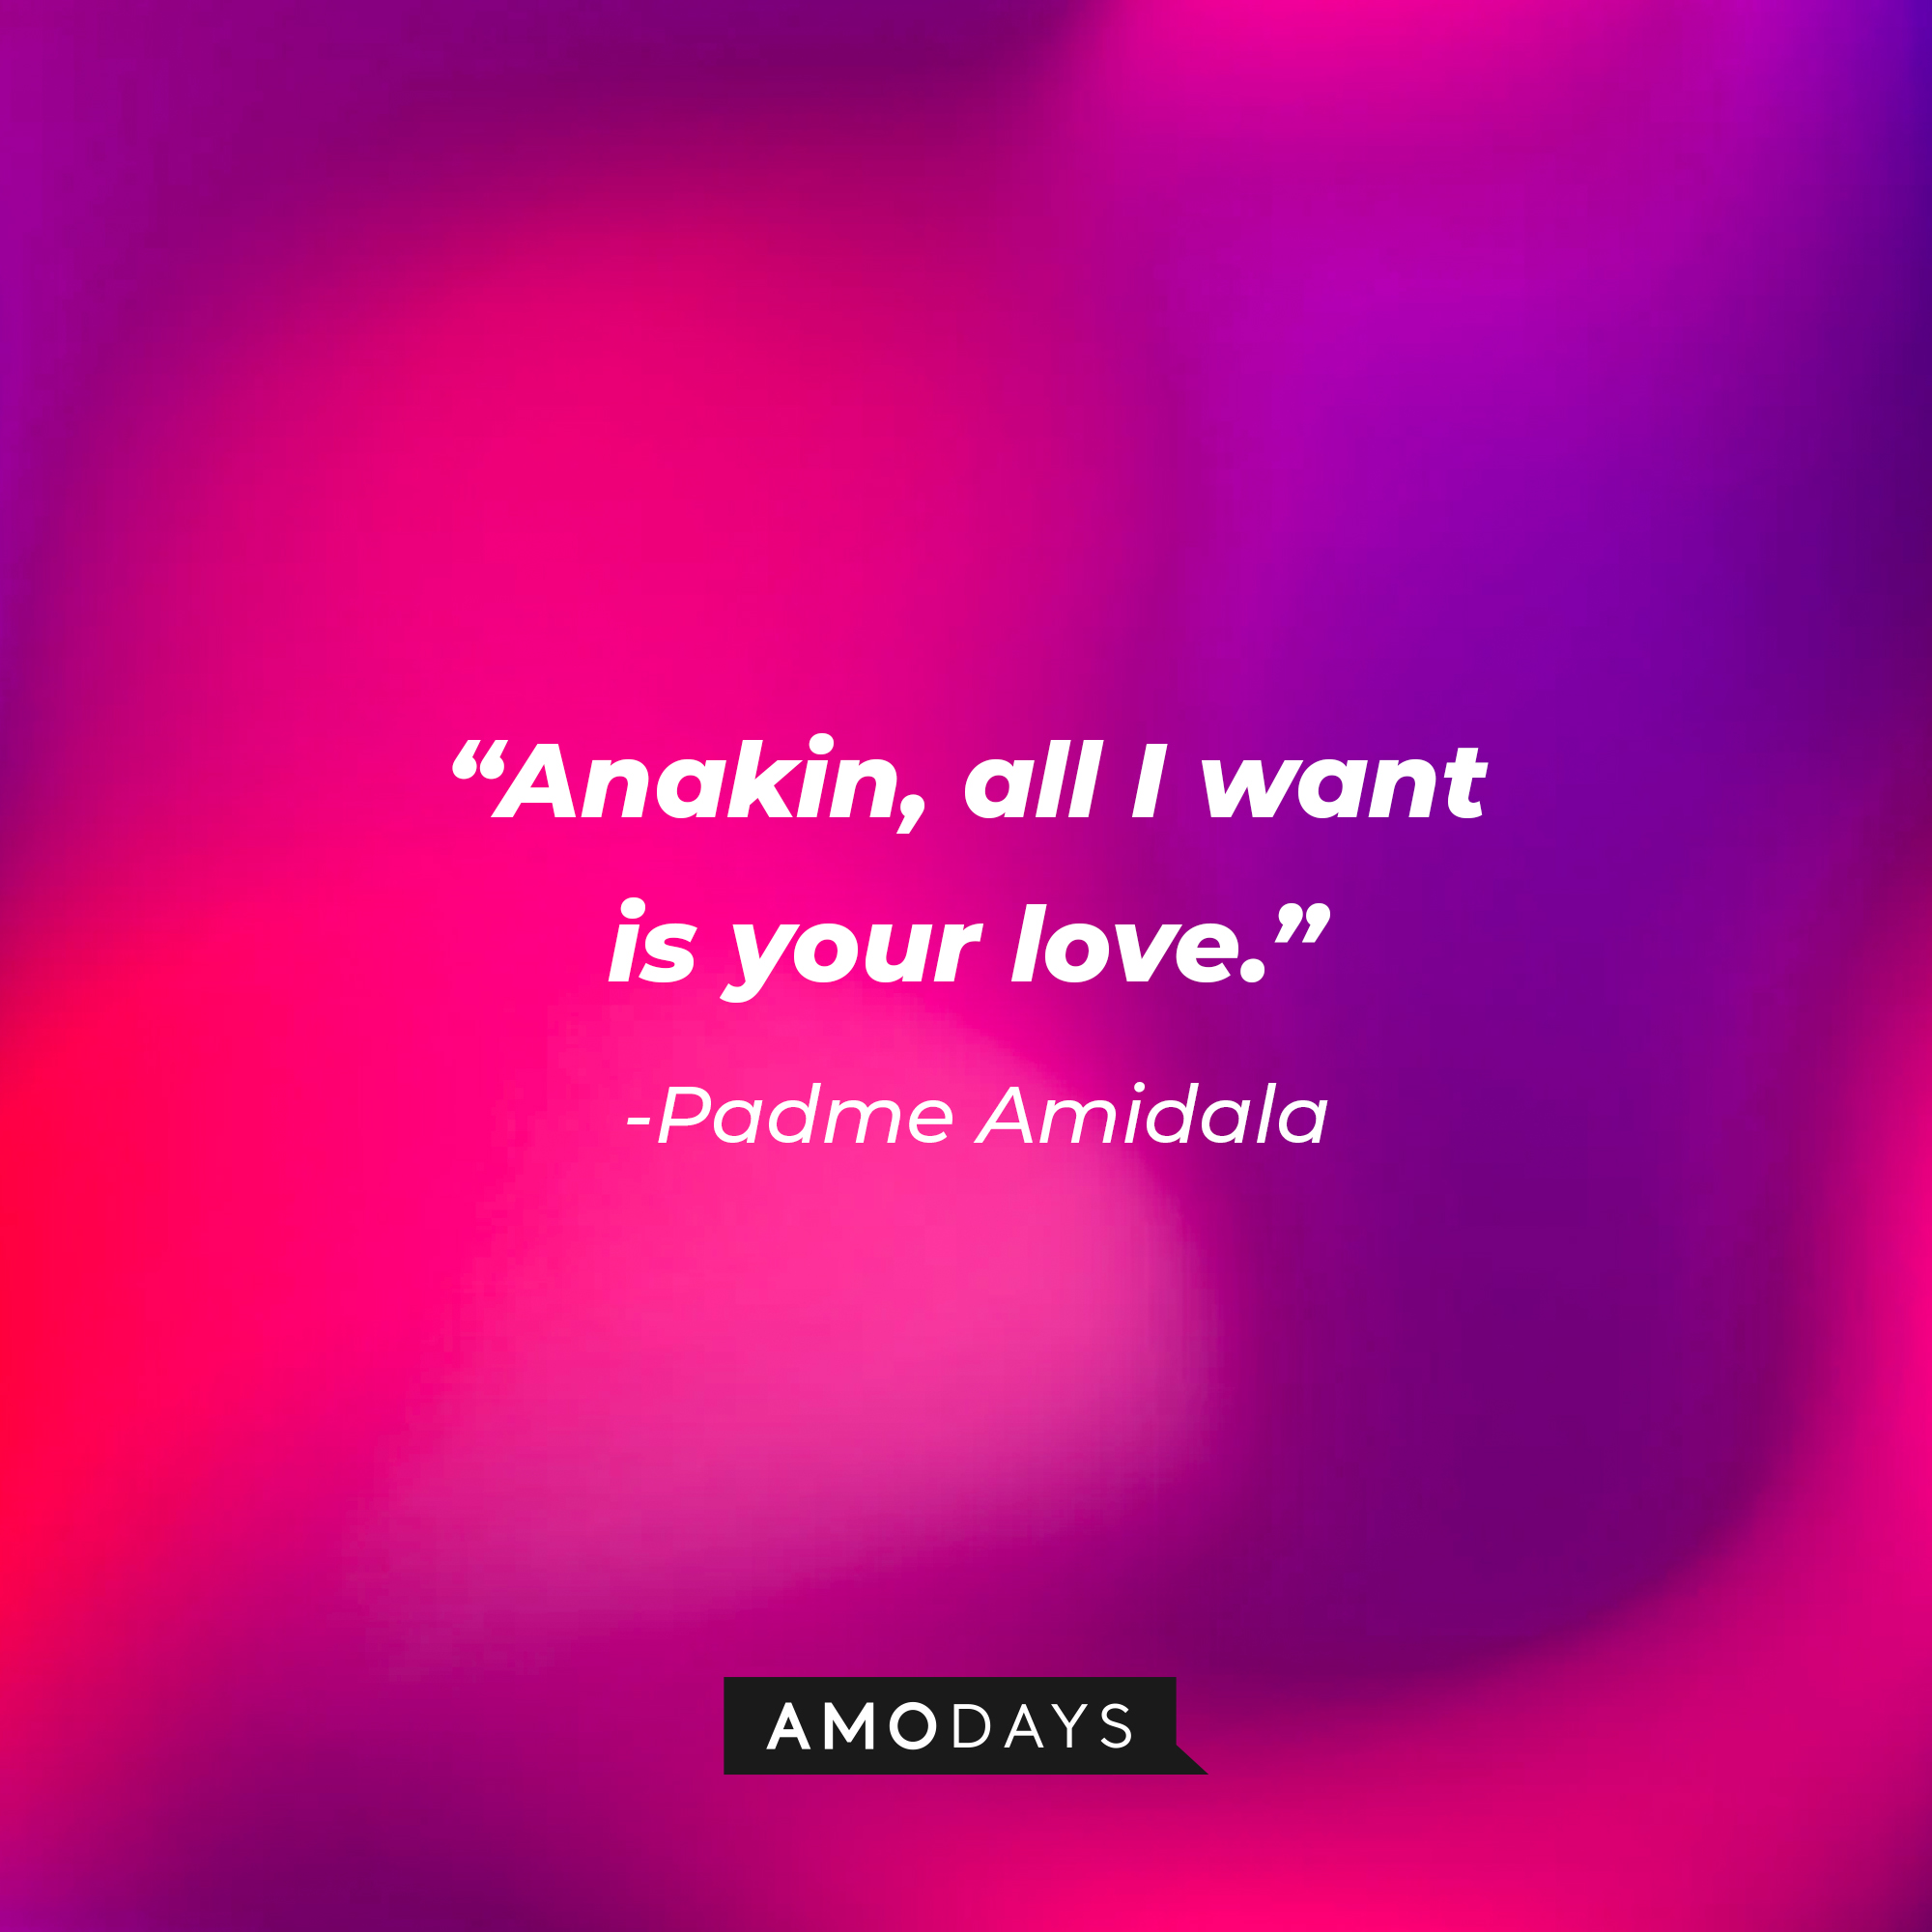 Padme Amidala's quote: "Anakin, all I want is your love." | Source: AmoDays